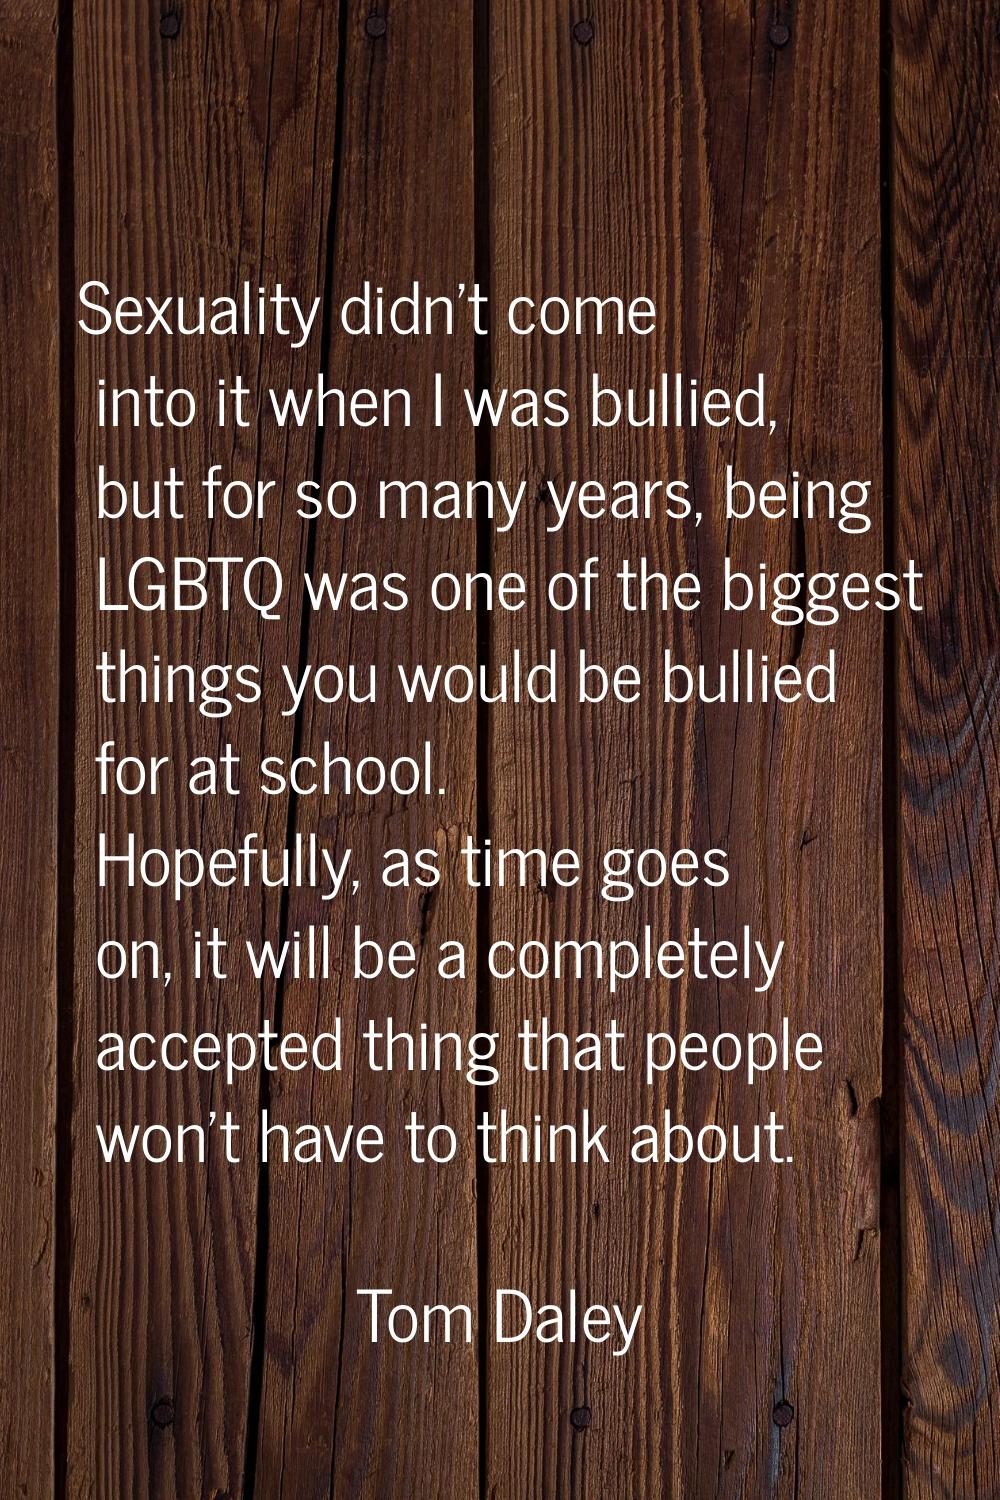 Sexuality didn't come into it when I was bullied, but for so many years, being LGBTQ was one of the